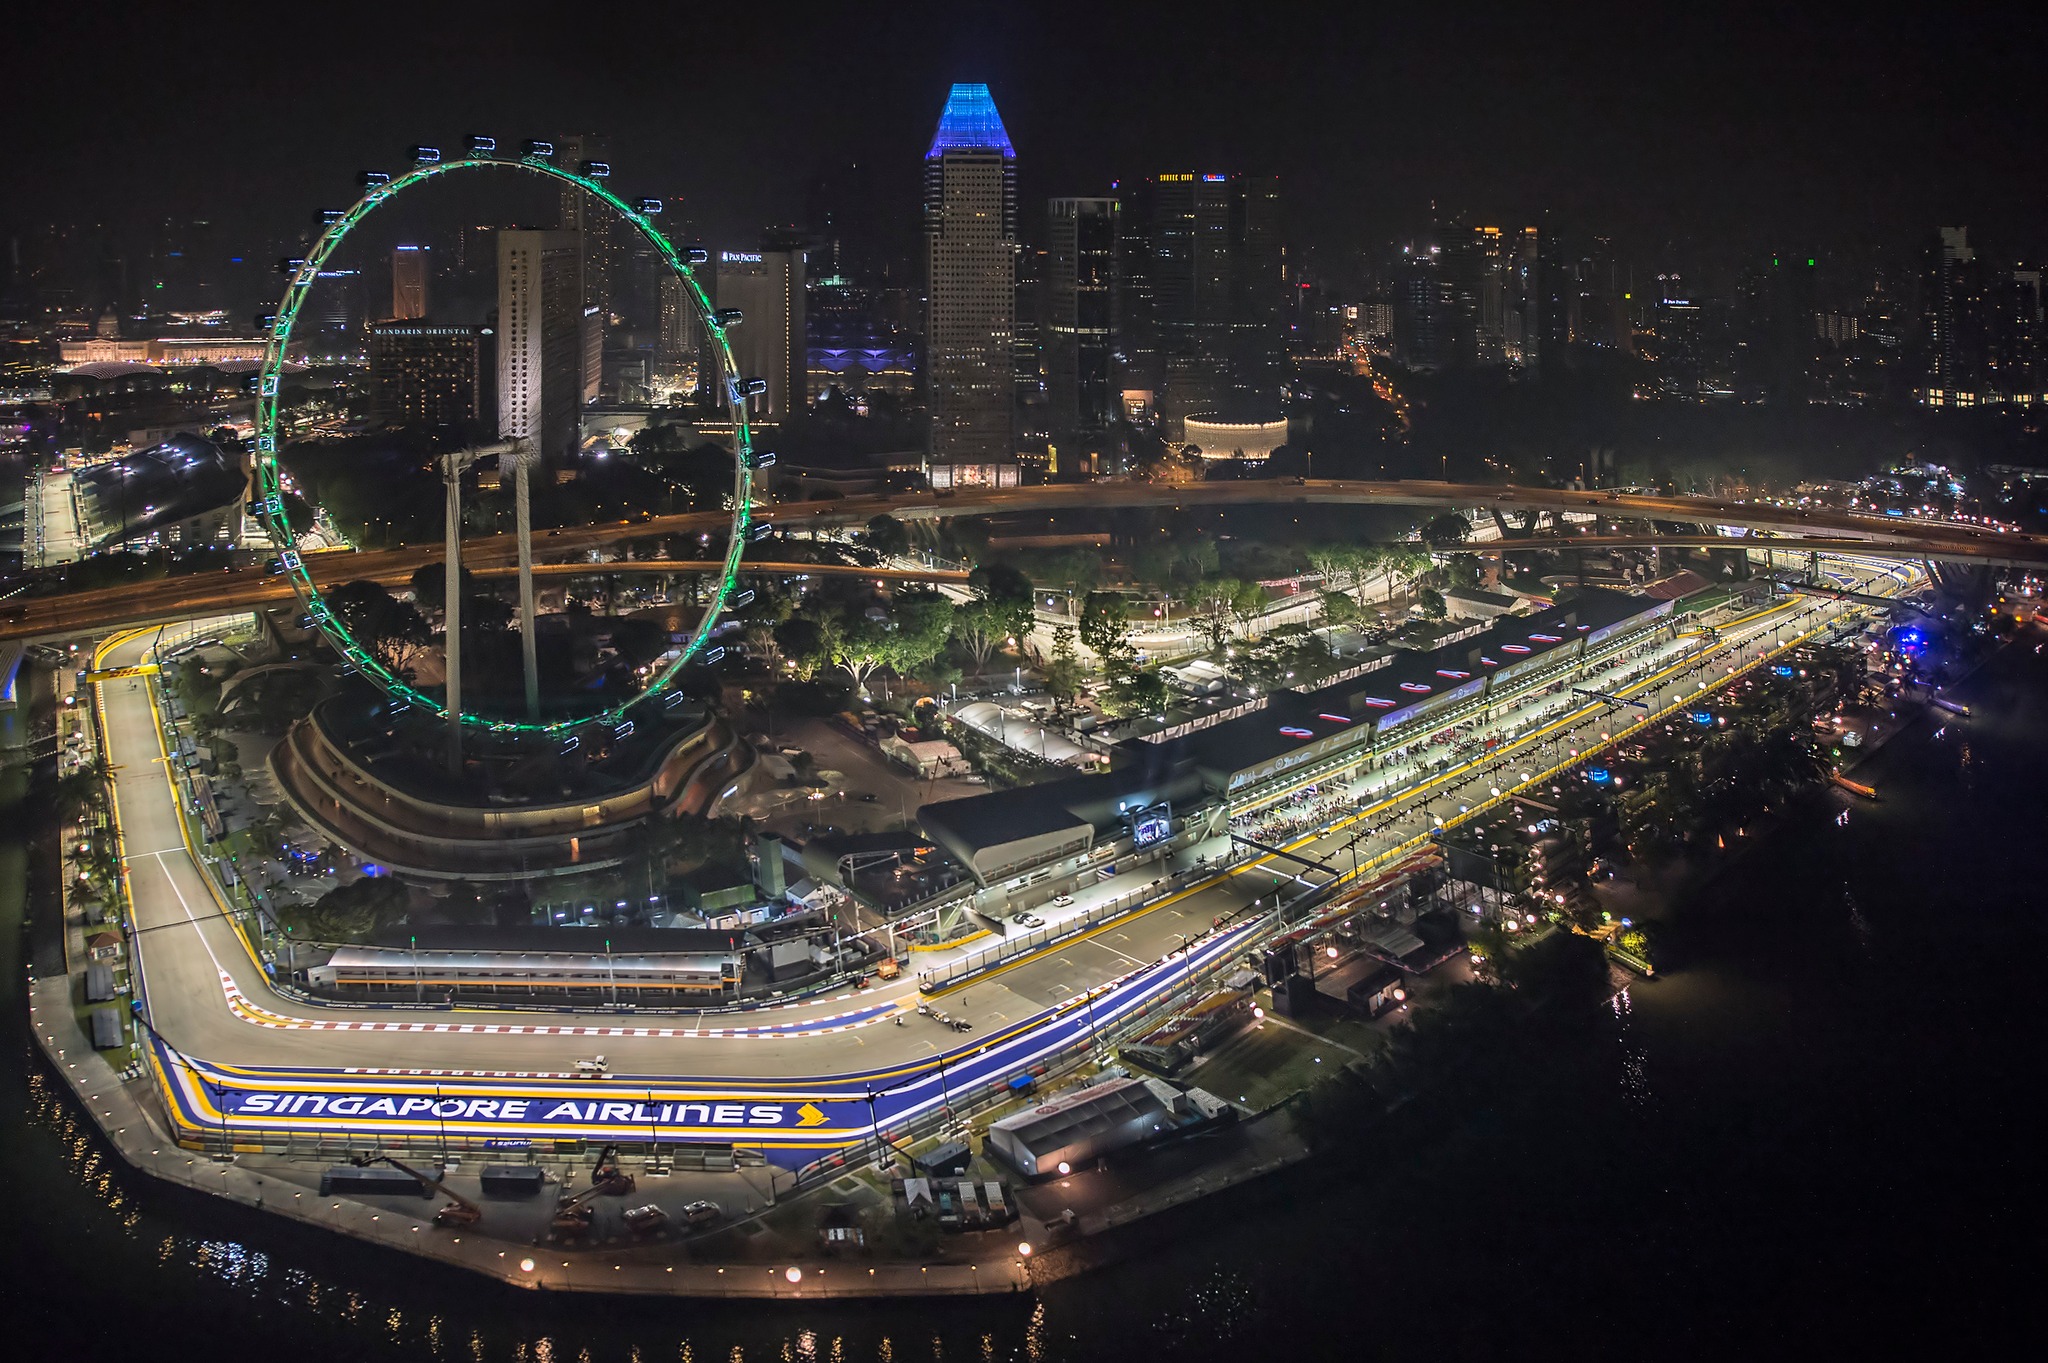 F1 Road Closures From Sep 28 To Oct 4 To Take Note Of — And The Best Ways